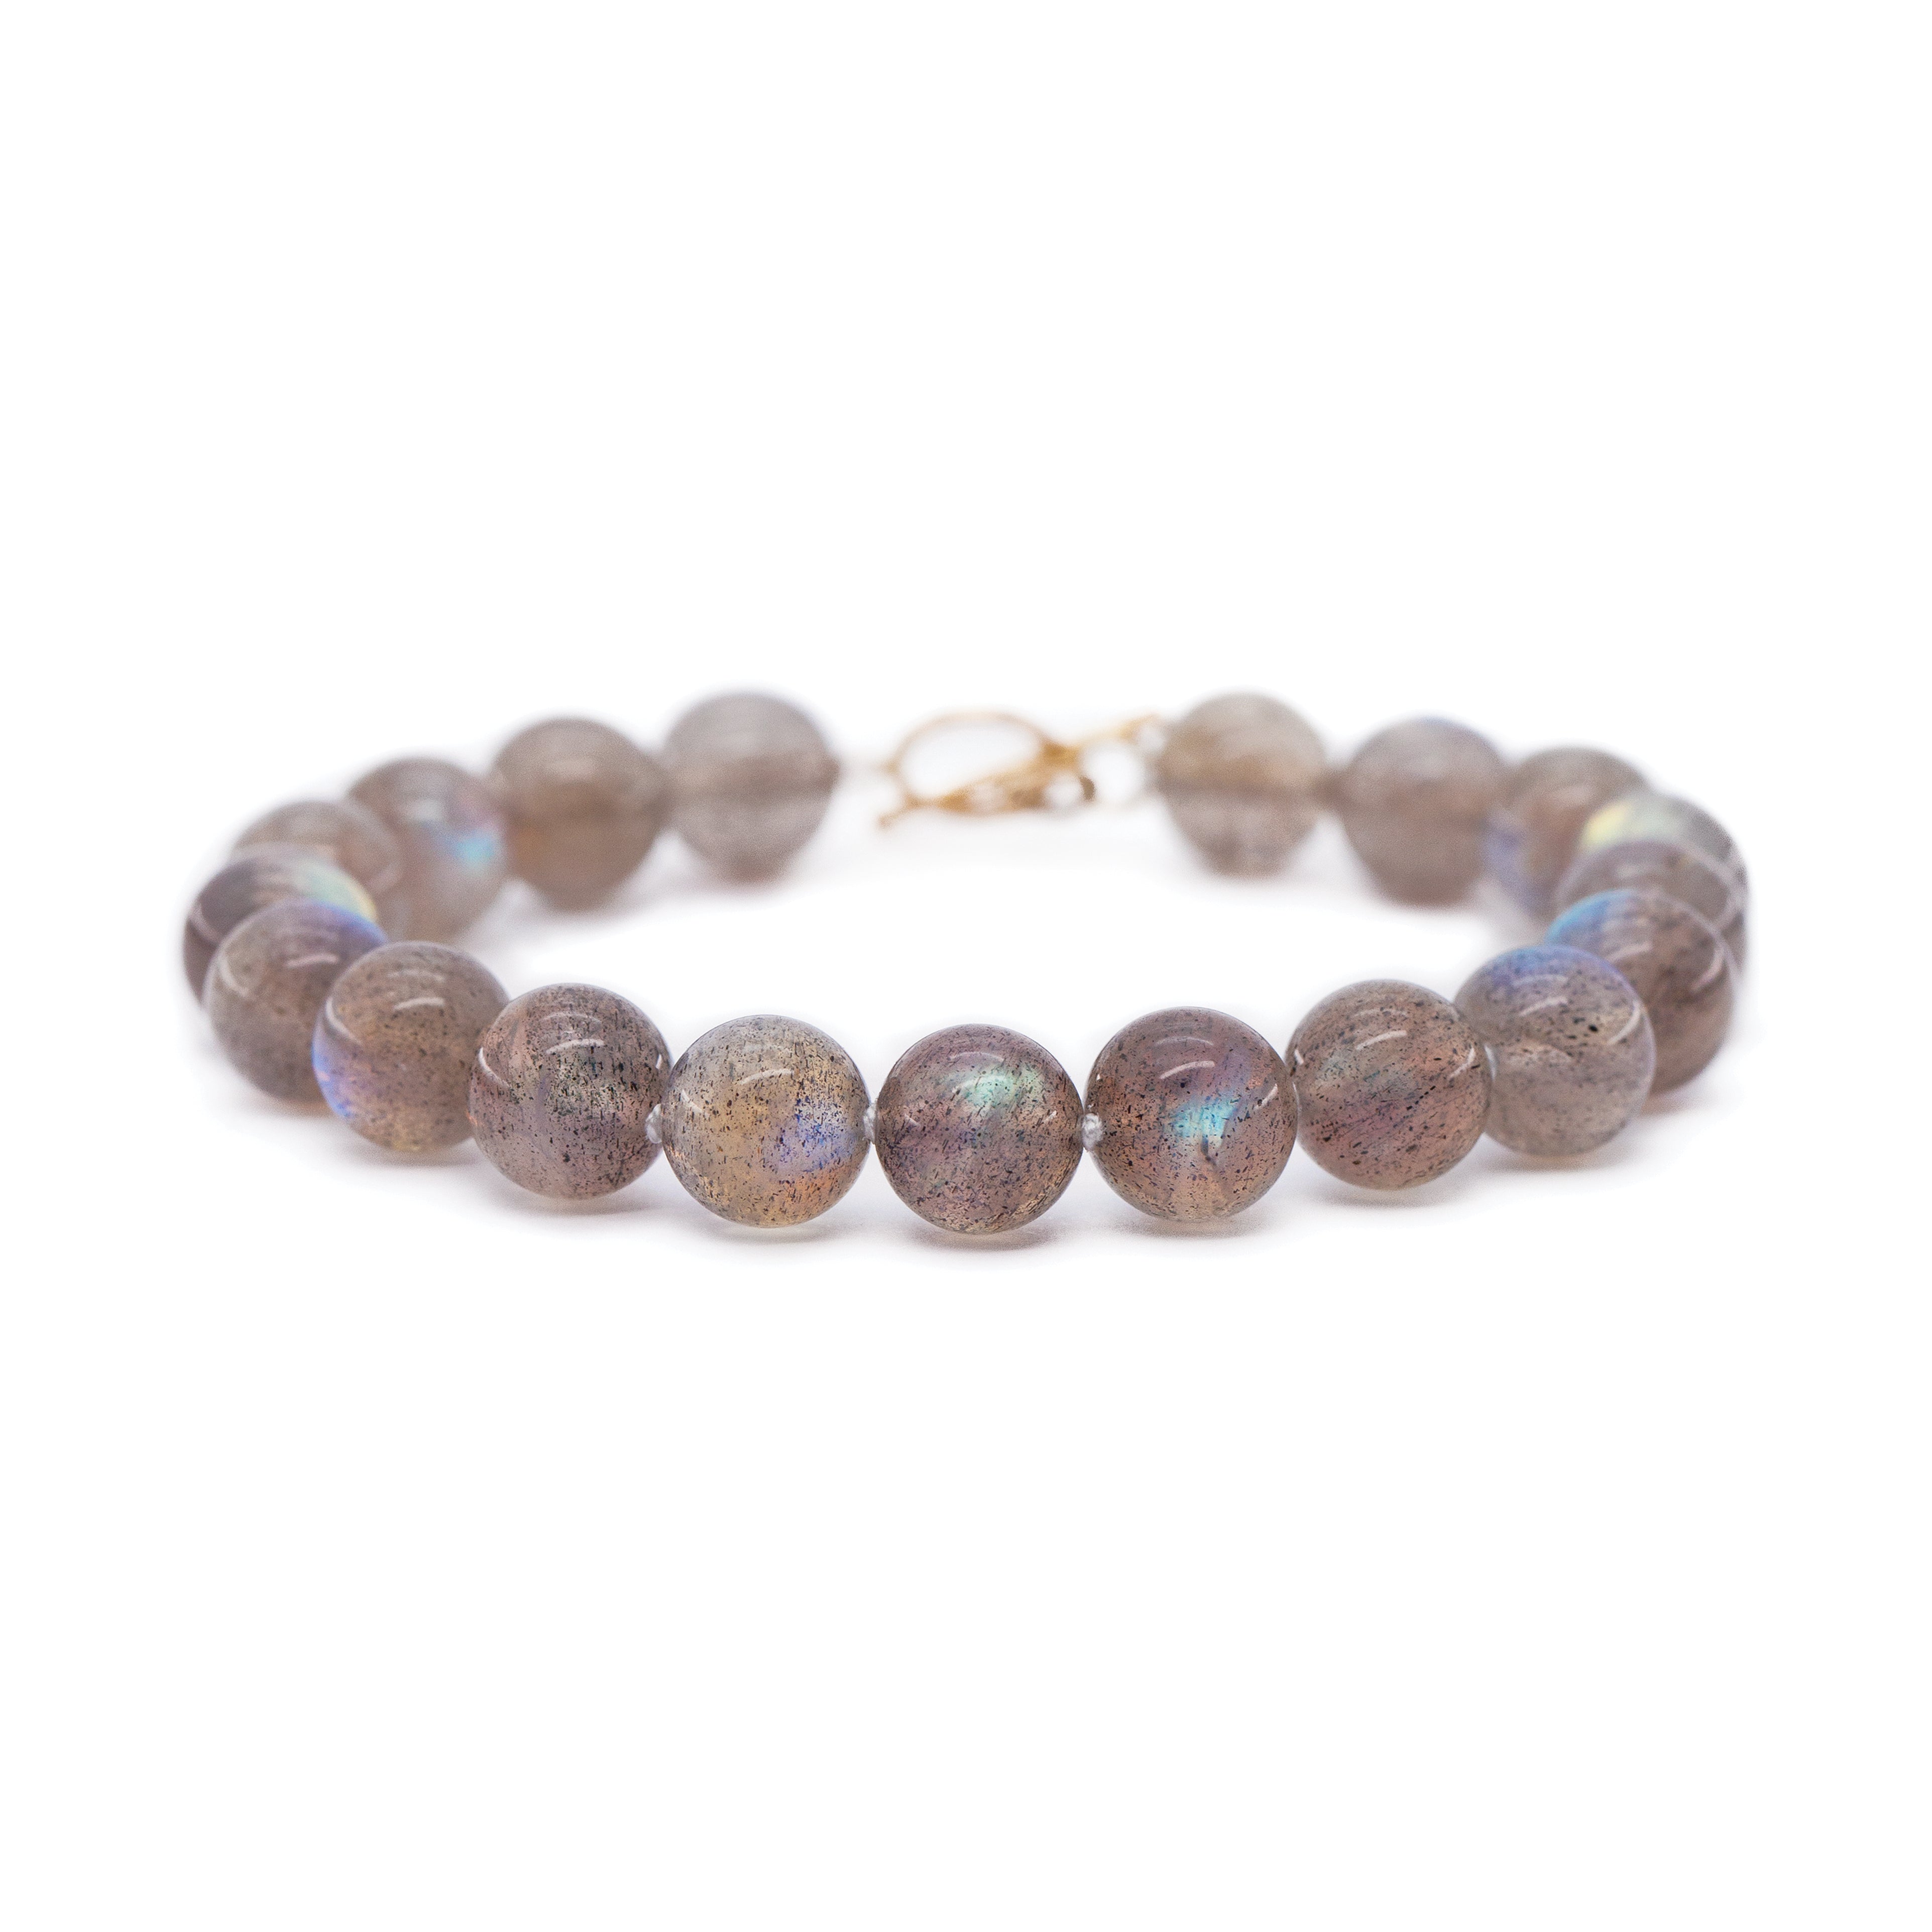 Crystal healing Labradorite bracelet known for energy protection